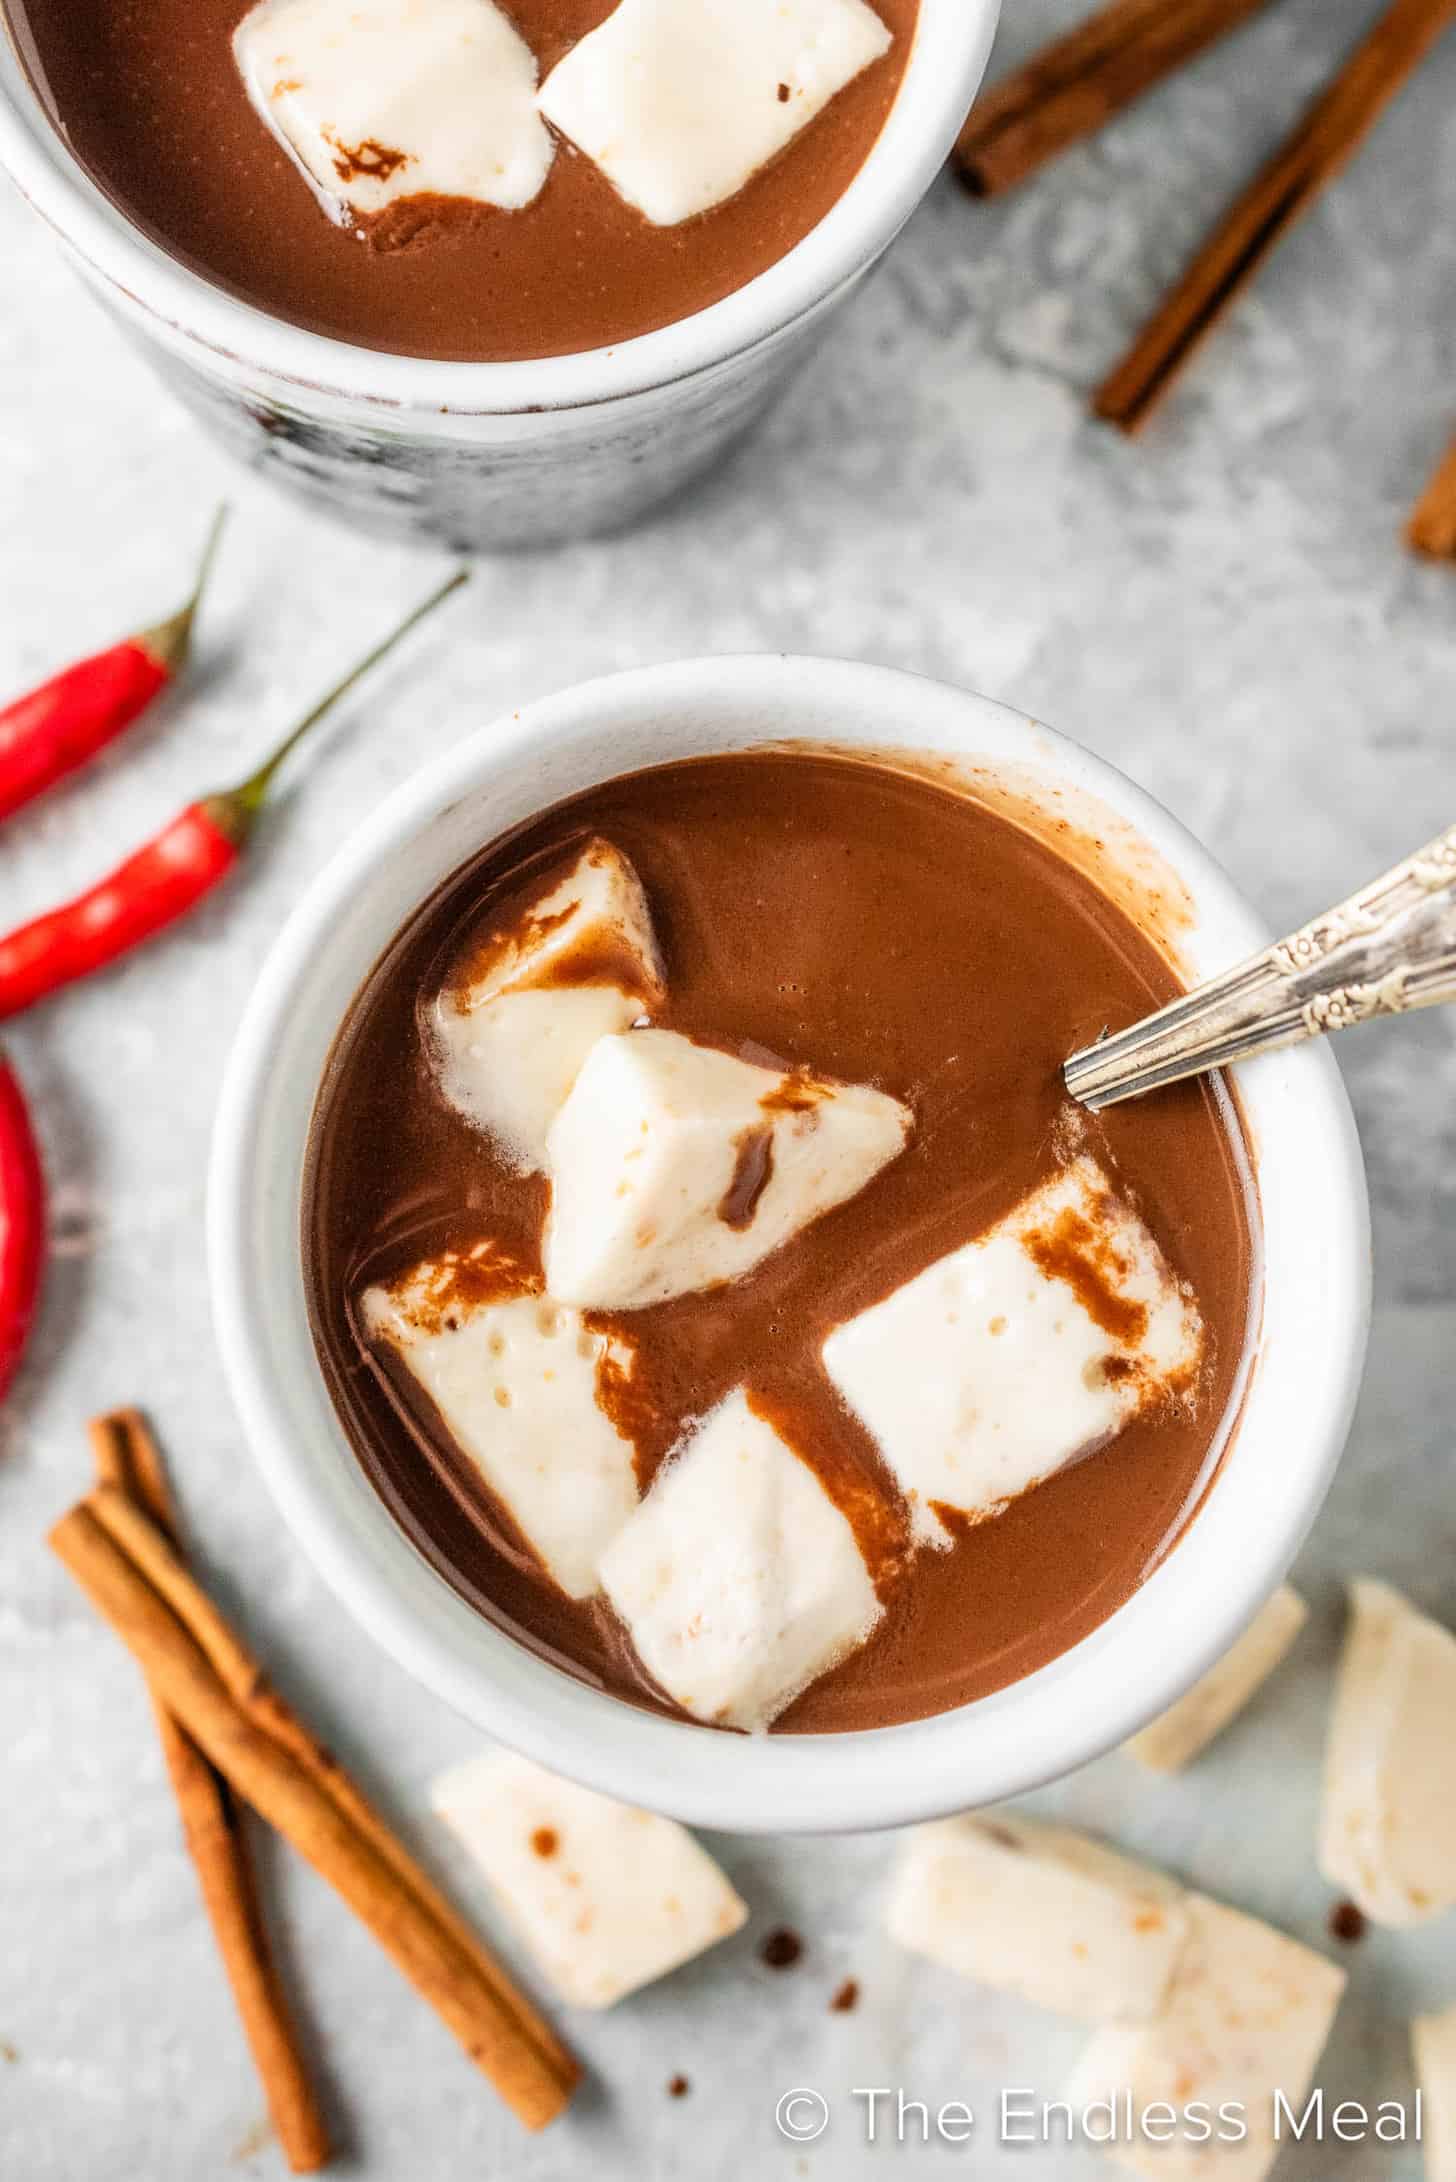 Looking down on a mug of Mexican Spicy Hot Chocolate with marshmallows